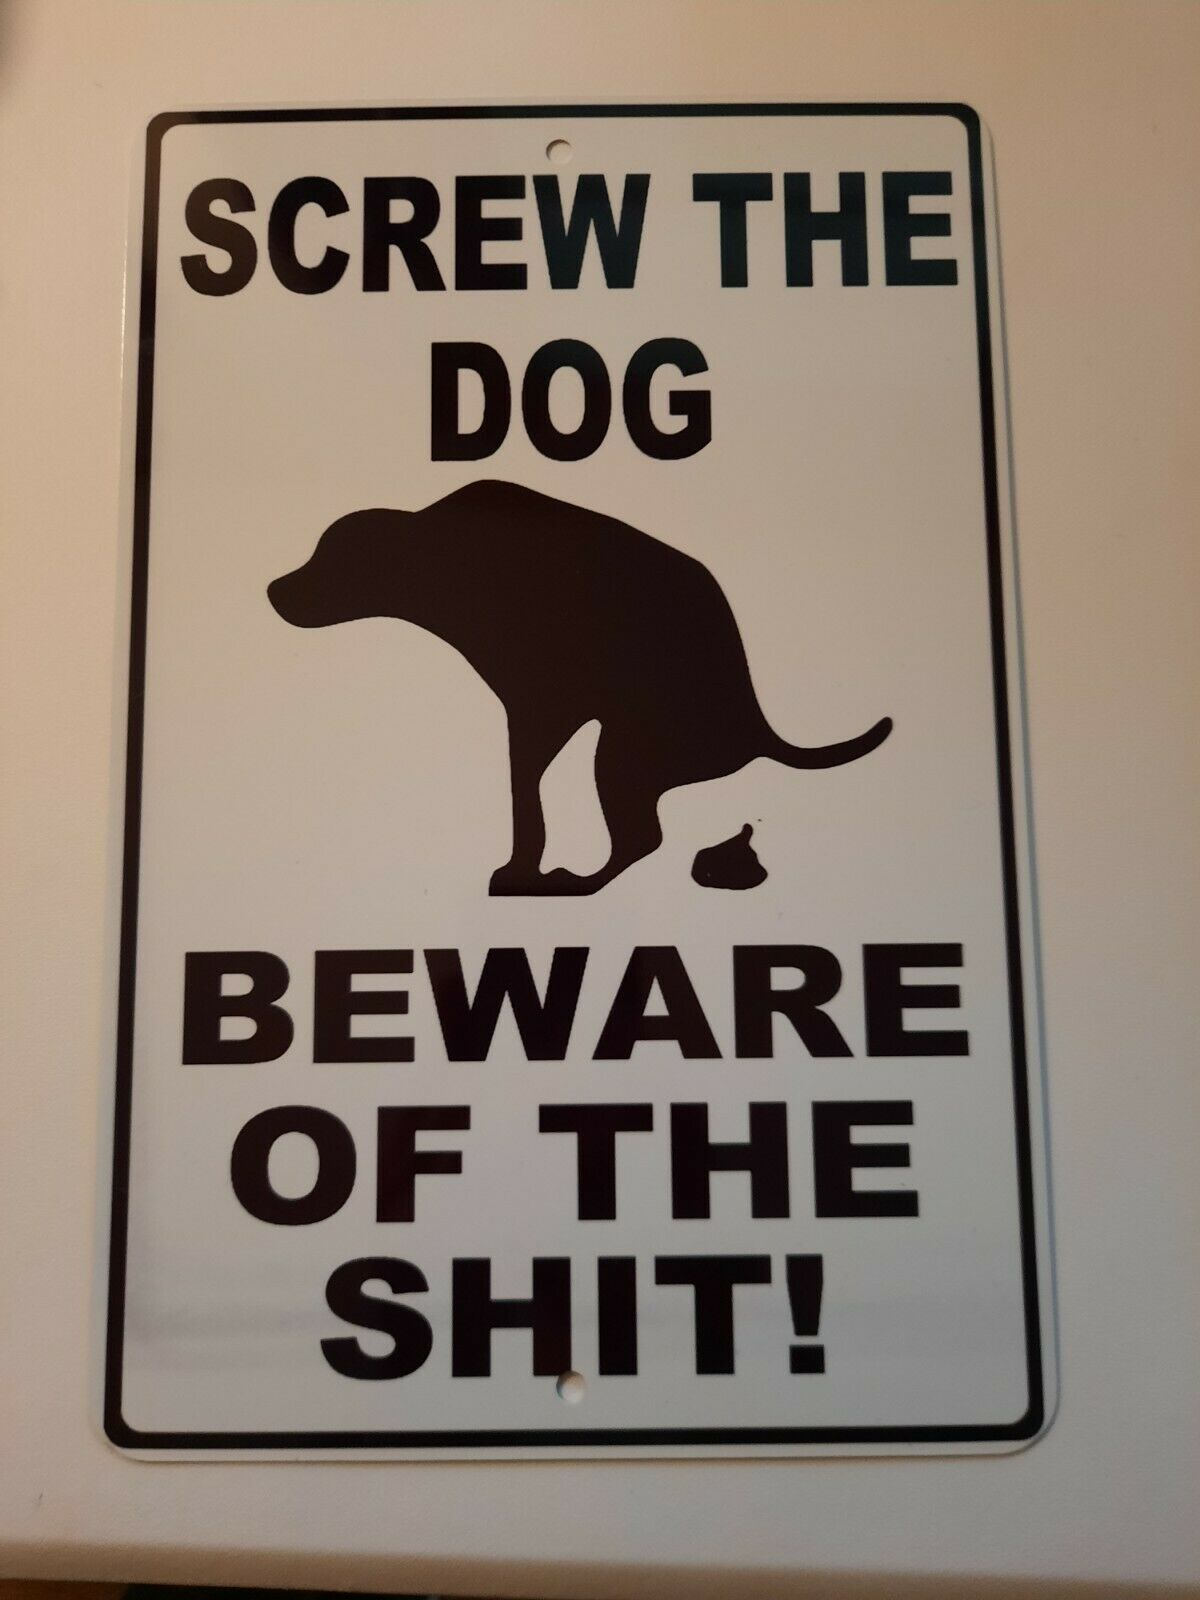 Screw the Dog Beware of the SHIT 8x12 Aluminum Metal Wall Funny Misc Garage Poster Sign Animals